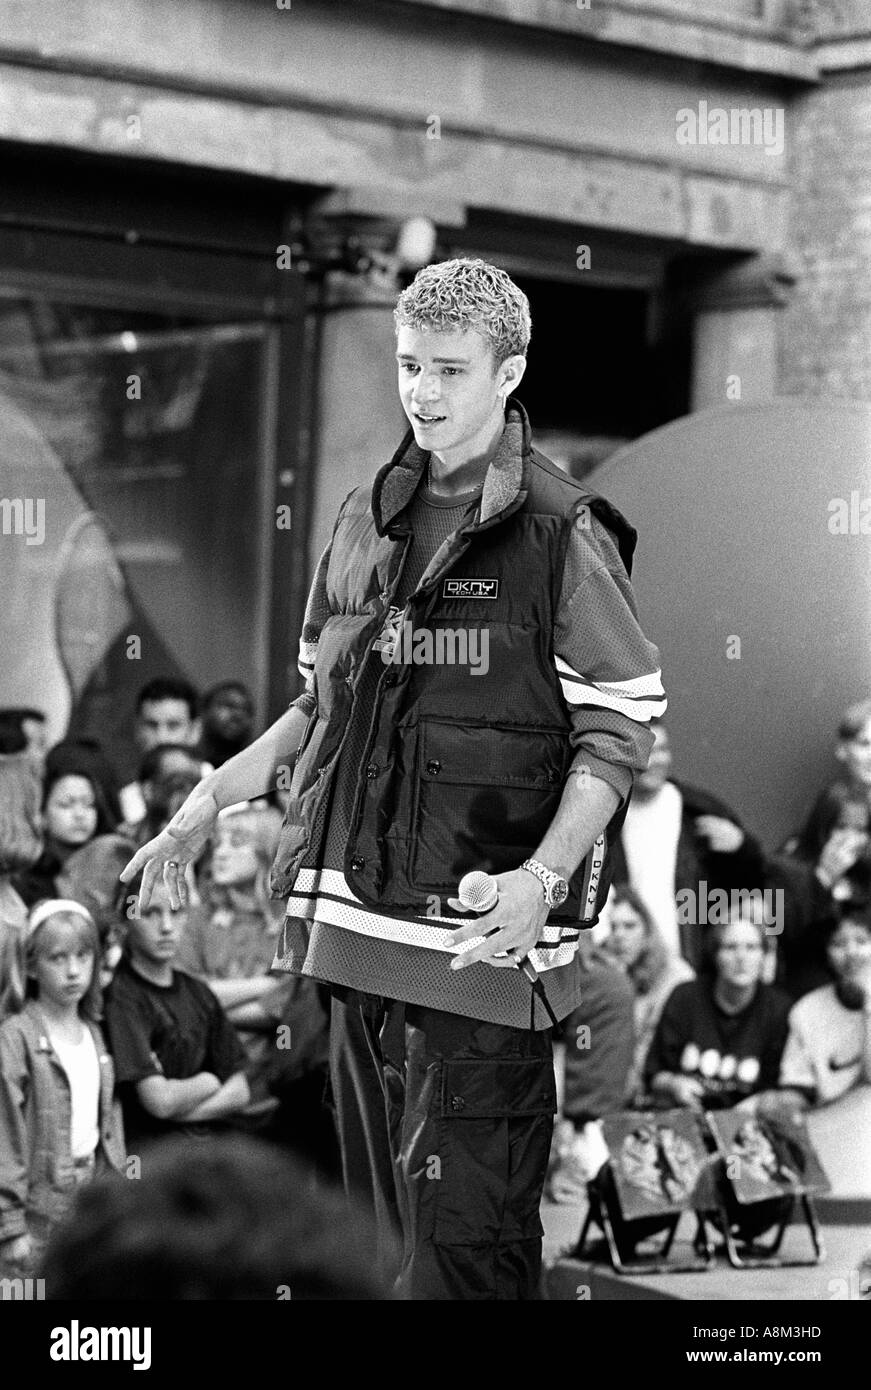 Justin Timberlake his band solo Nsync perform at a TV show in Covent  Garden London 1997 Stock Photo